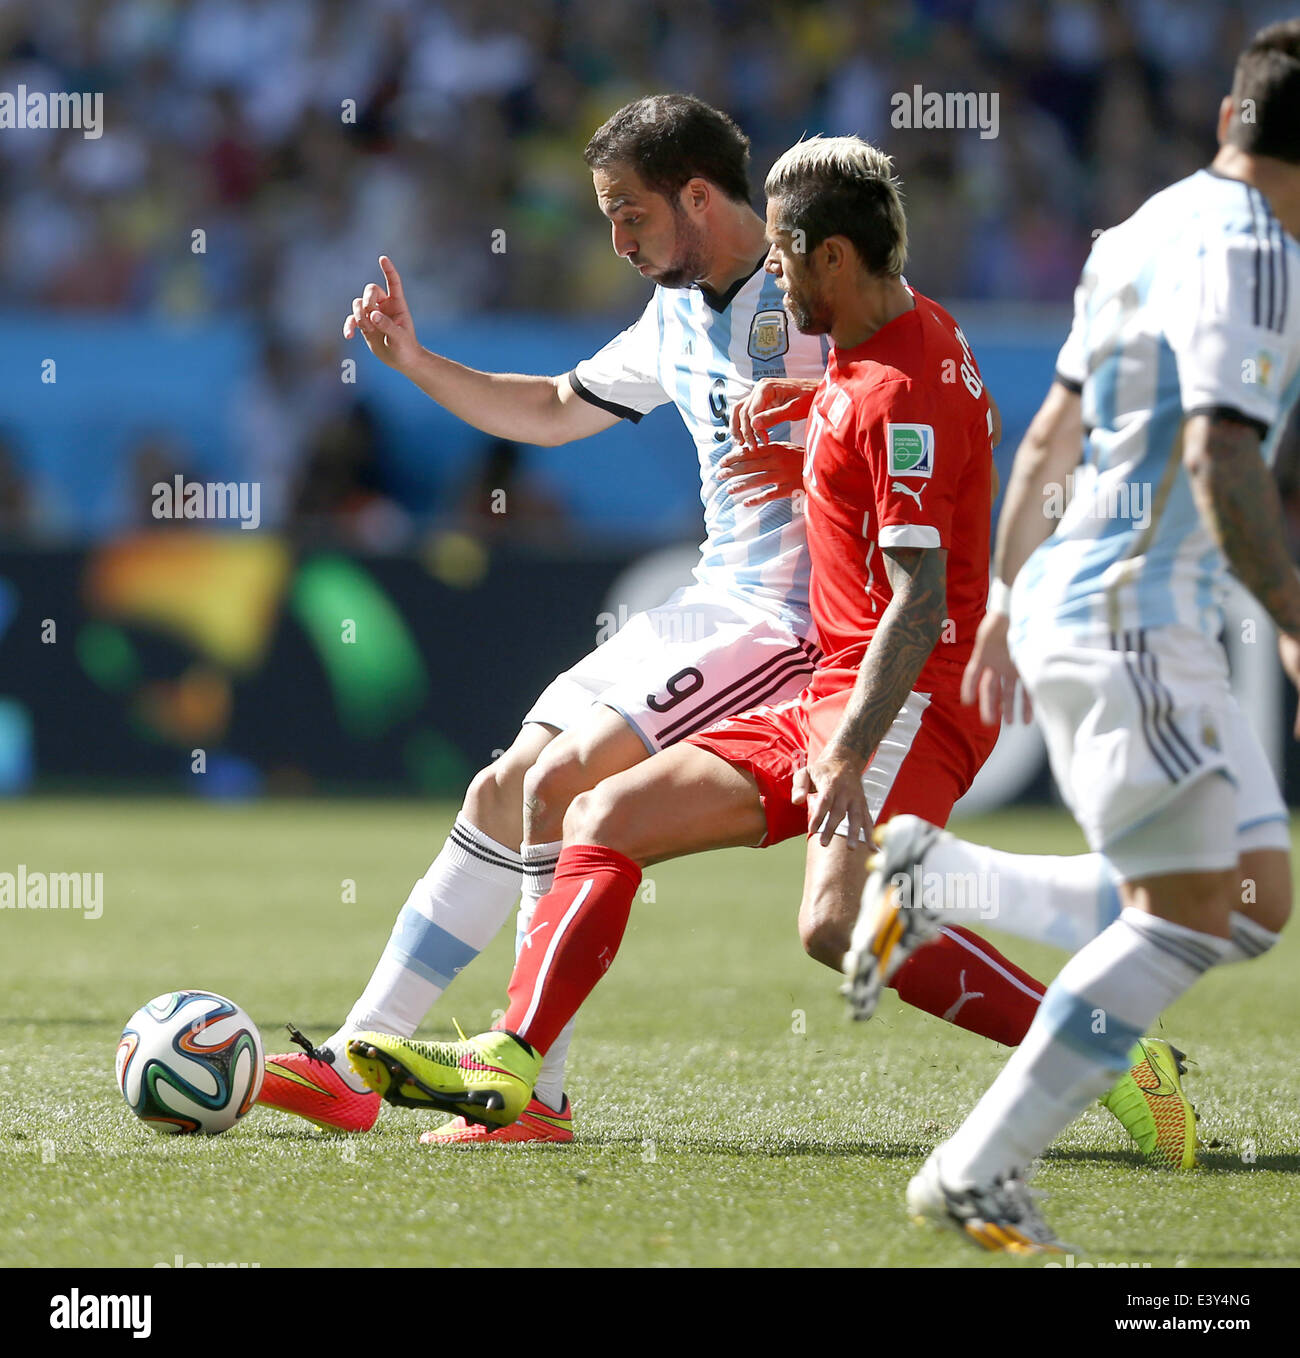 Sao Paulo, Brazil. 1st July, 2014. Argentina's Gonzalo Higuain (L) vies with Switzerland's Valon Behrami (C) during a Round of 16 match between Argentina and Switzerland of 2014 FIFA World Cup at the Arena de Sao Paulo Stadium in Sao Paulo, Brazil, on July 1, 2014. Credit:  Wang Lili/Xinhua/Alamy Live News Stock Photo